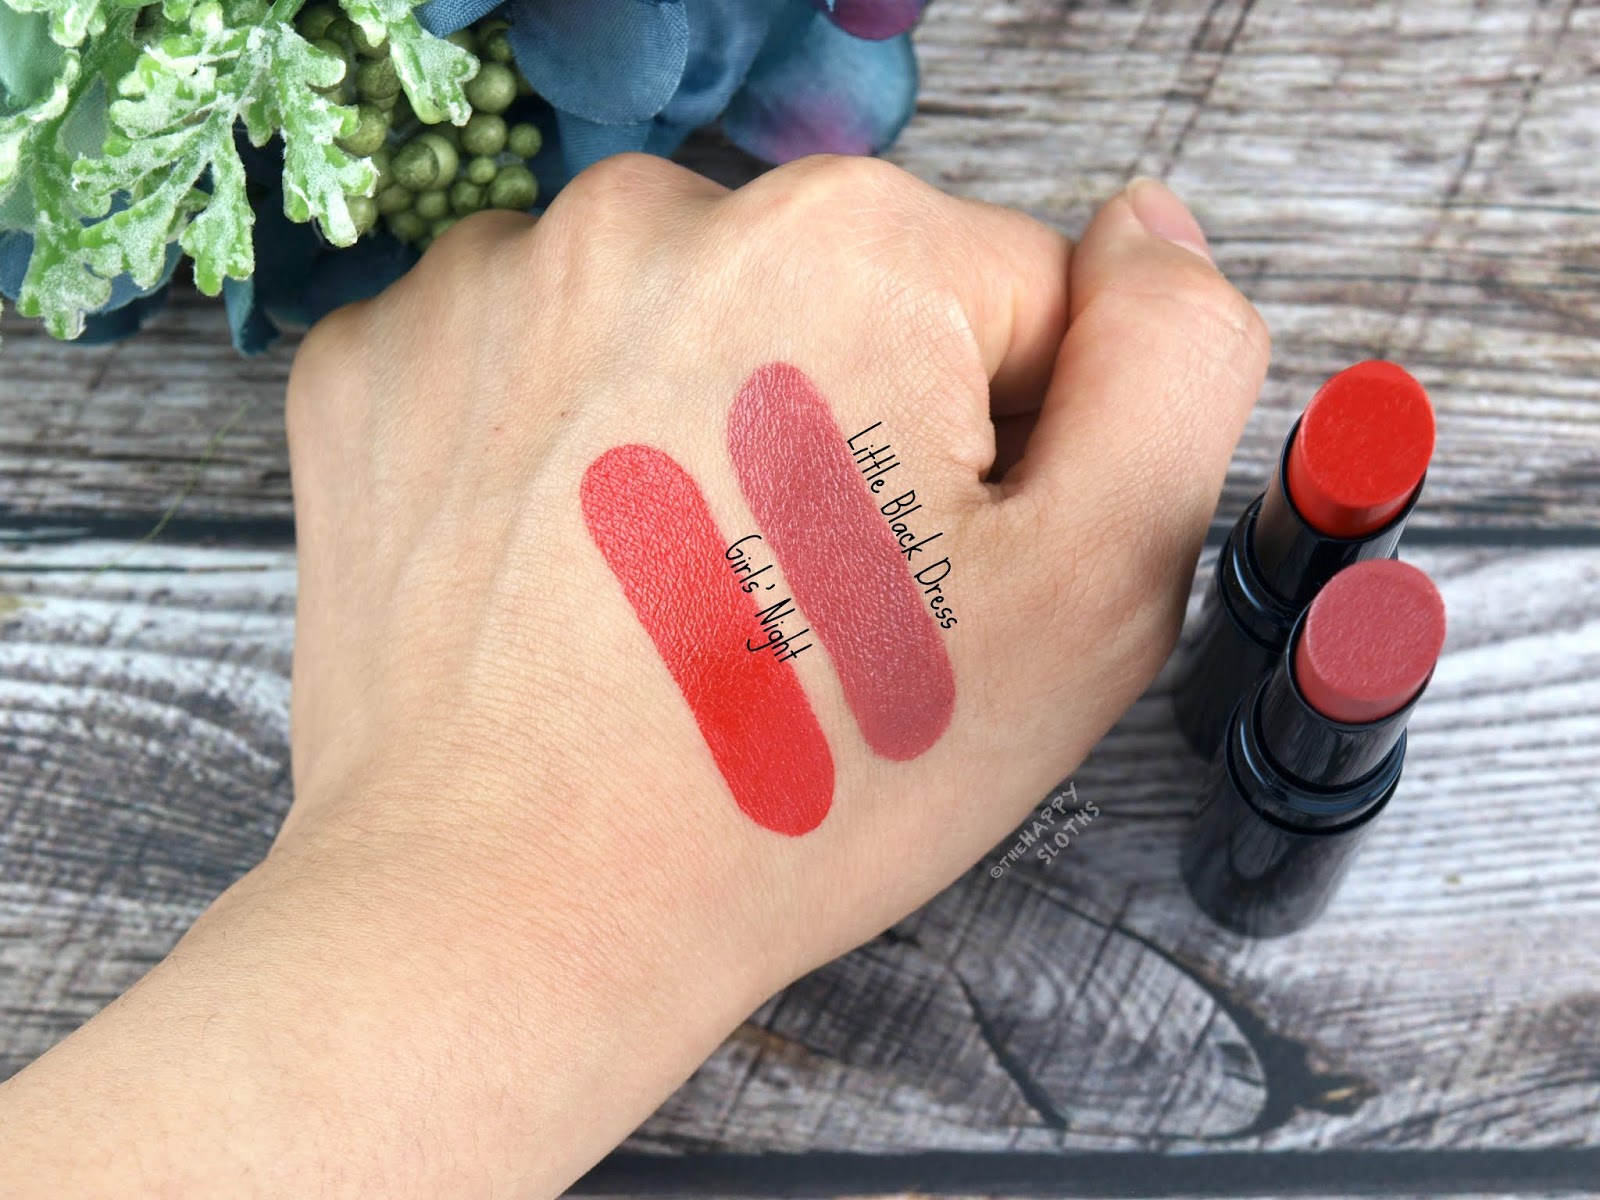 Beautycounter | Color Intense Lipstick in "Little Black Dress" & "Girls' Night": Review and Swatches